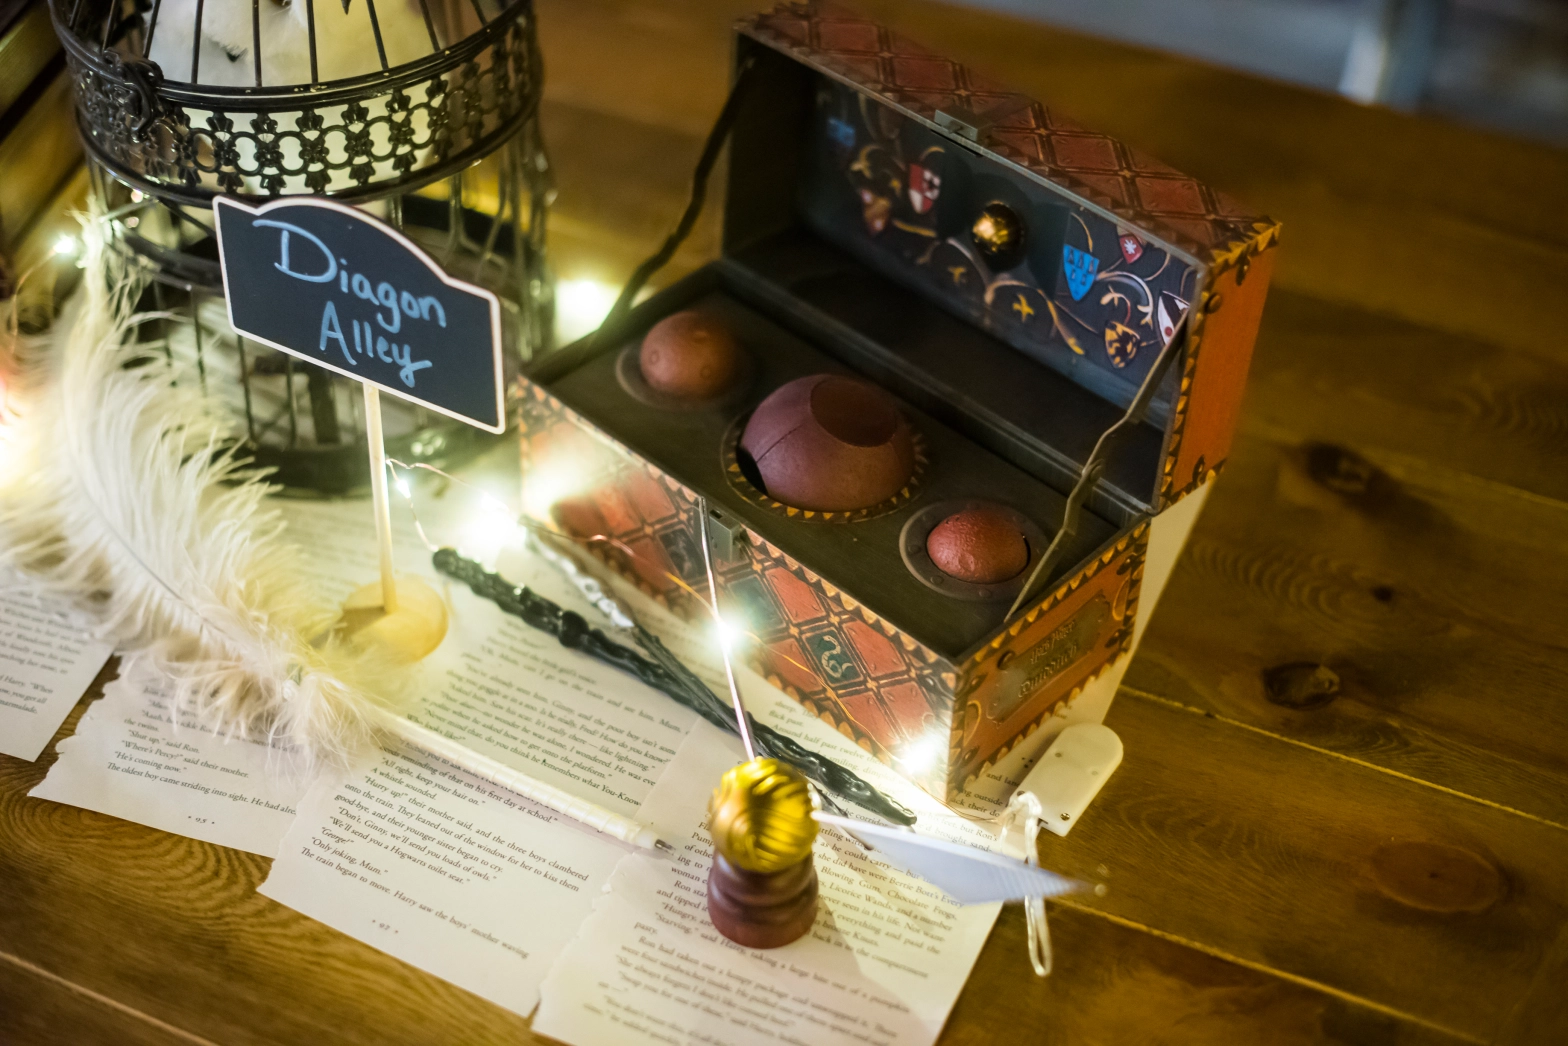 Here's How to Throw an Epic Harry Potter Birthday Party I Taste of Home